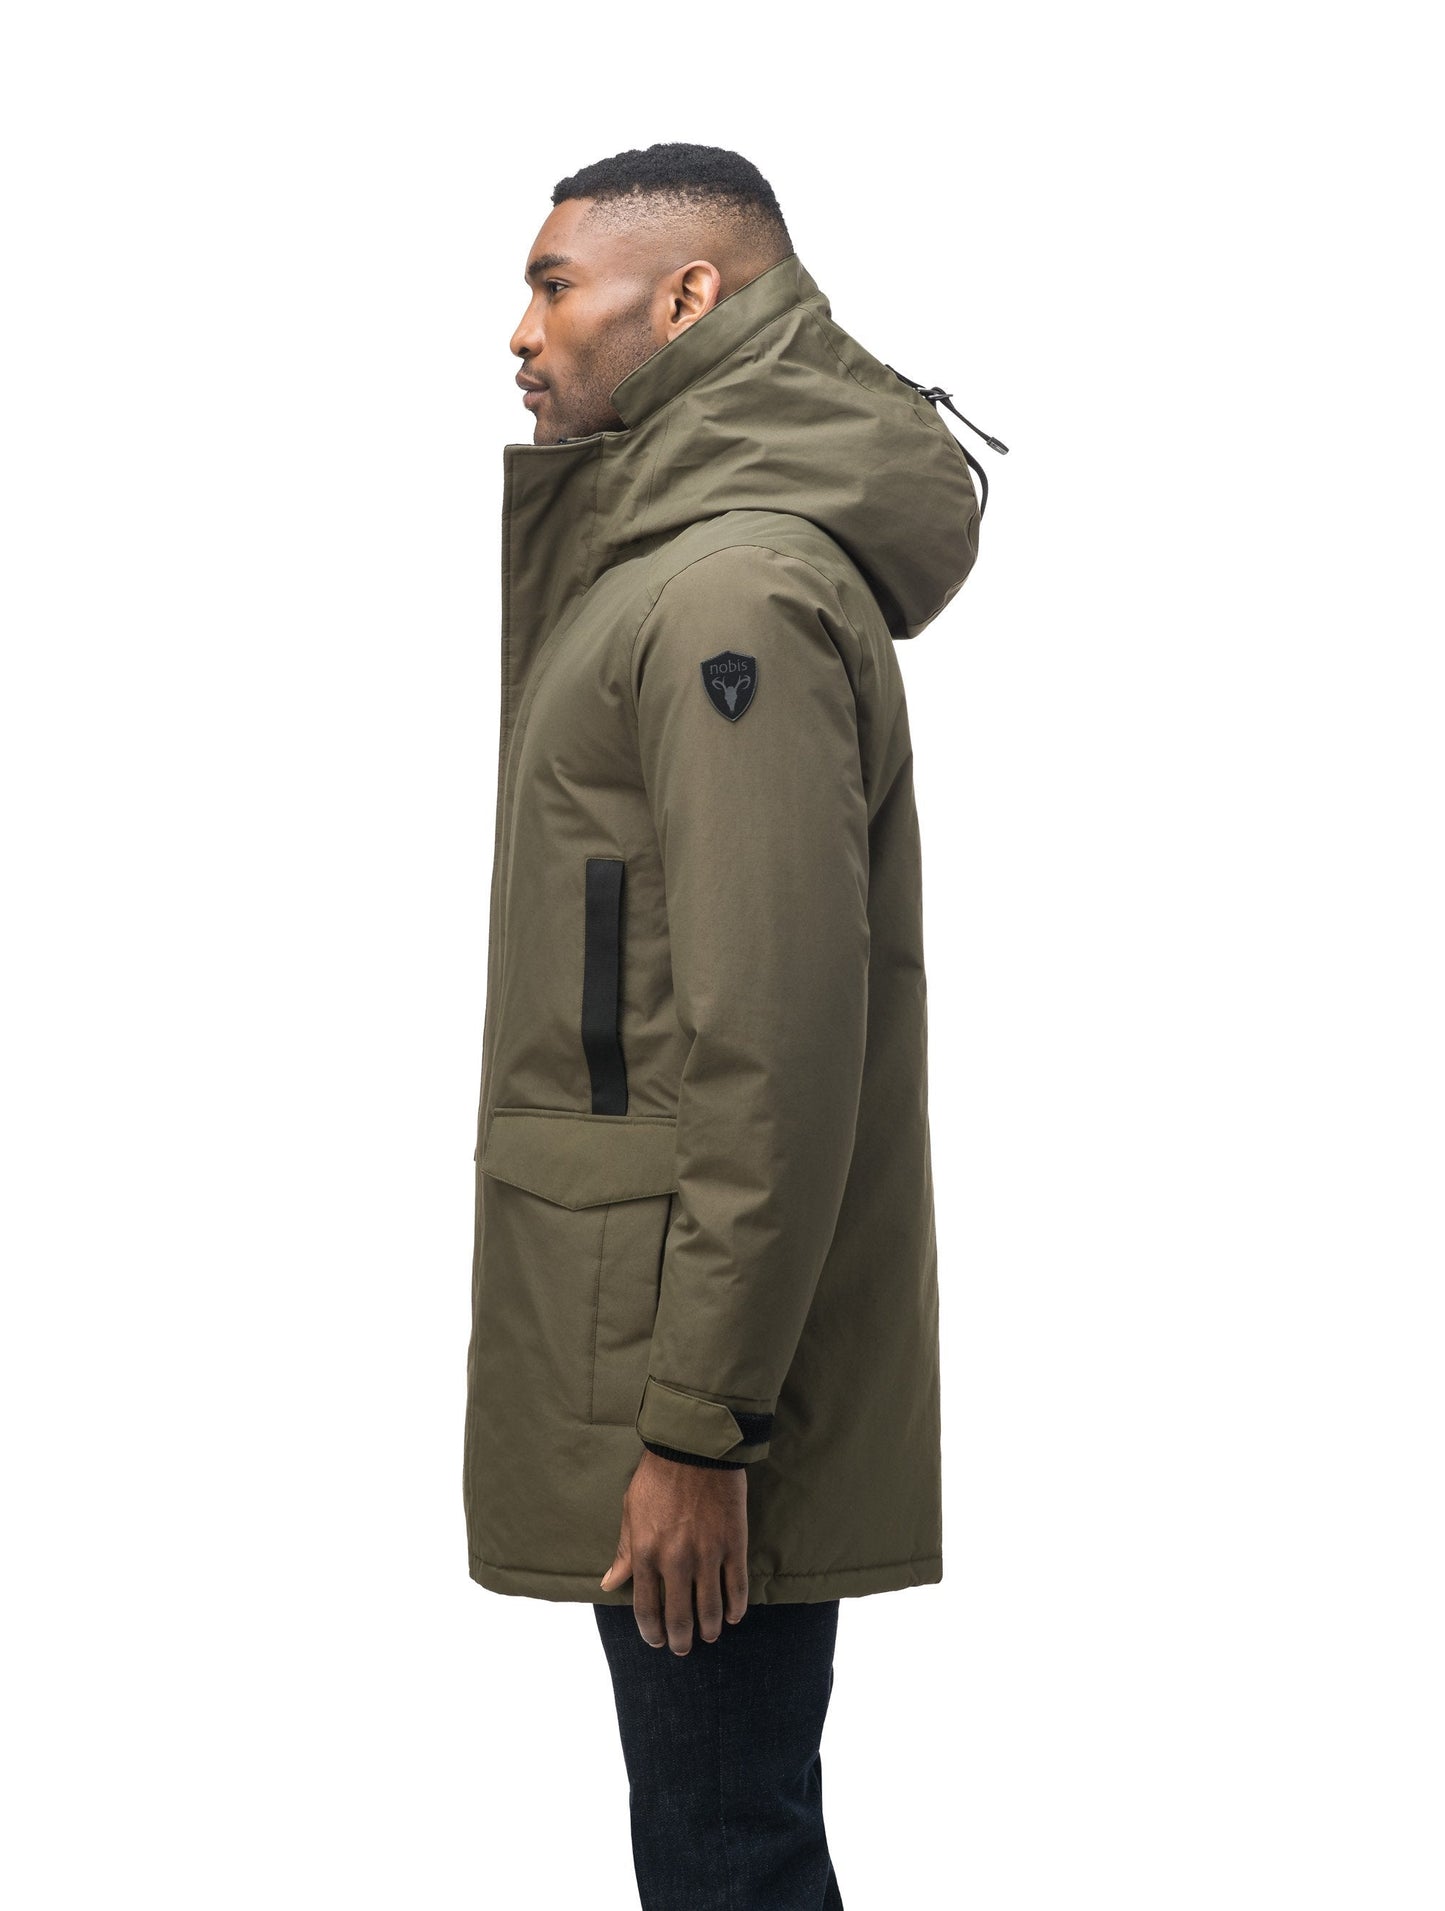 Lightweight men's parka with duck down fill and removable fur trim around the hood in Fatigue